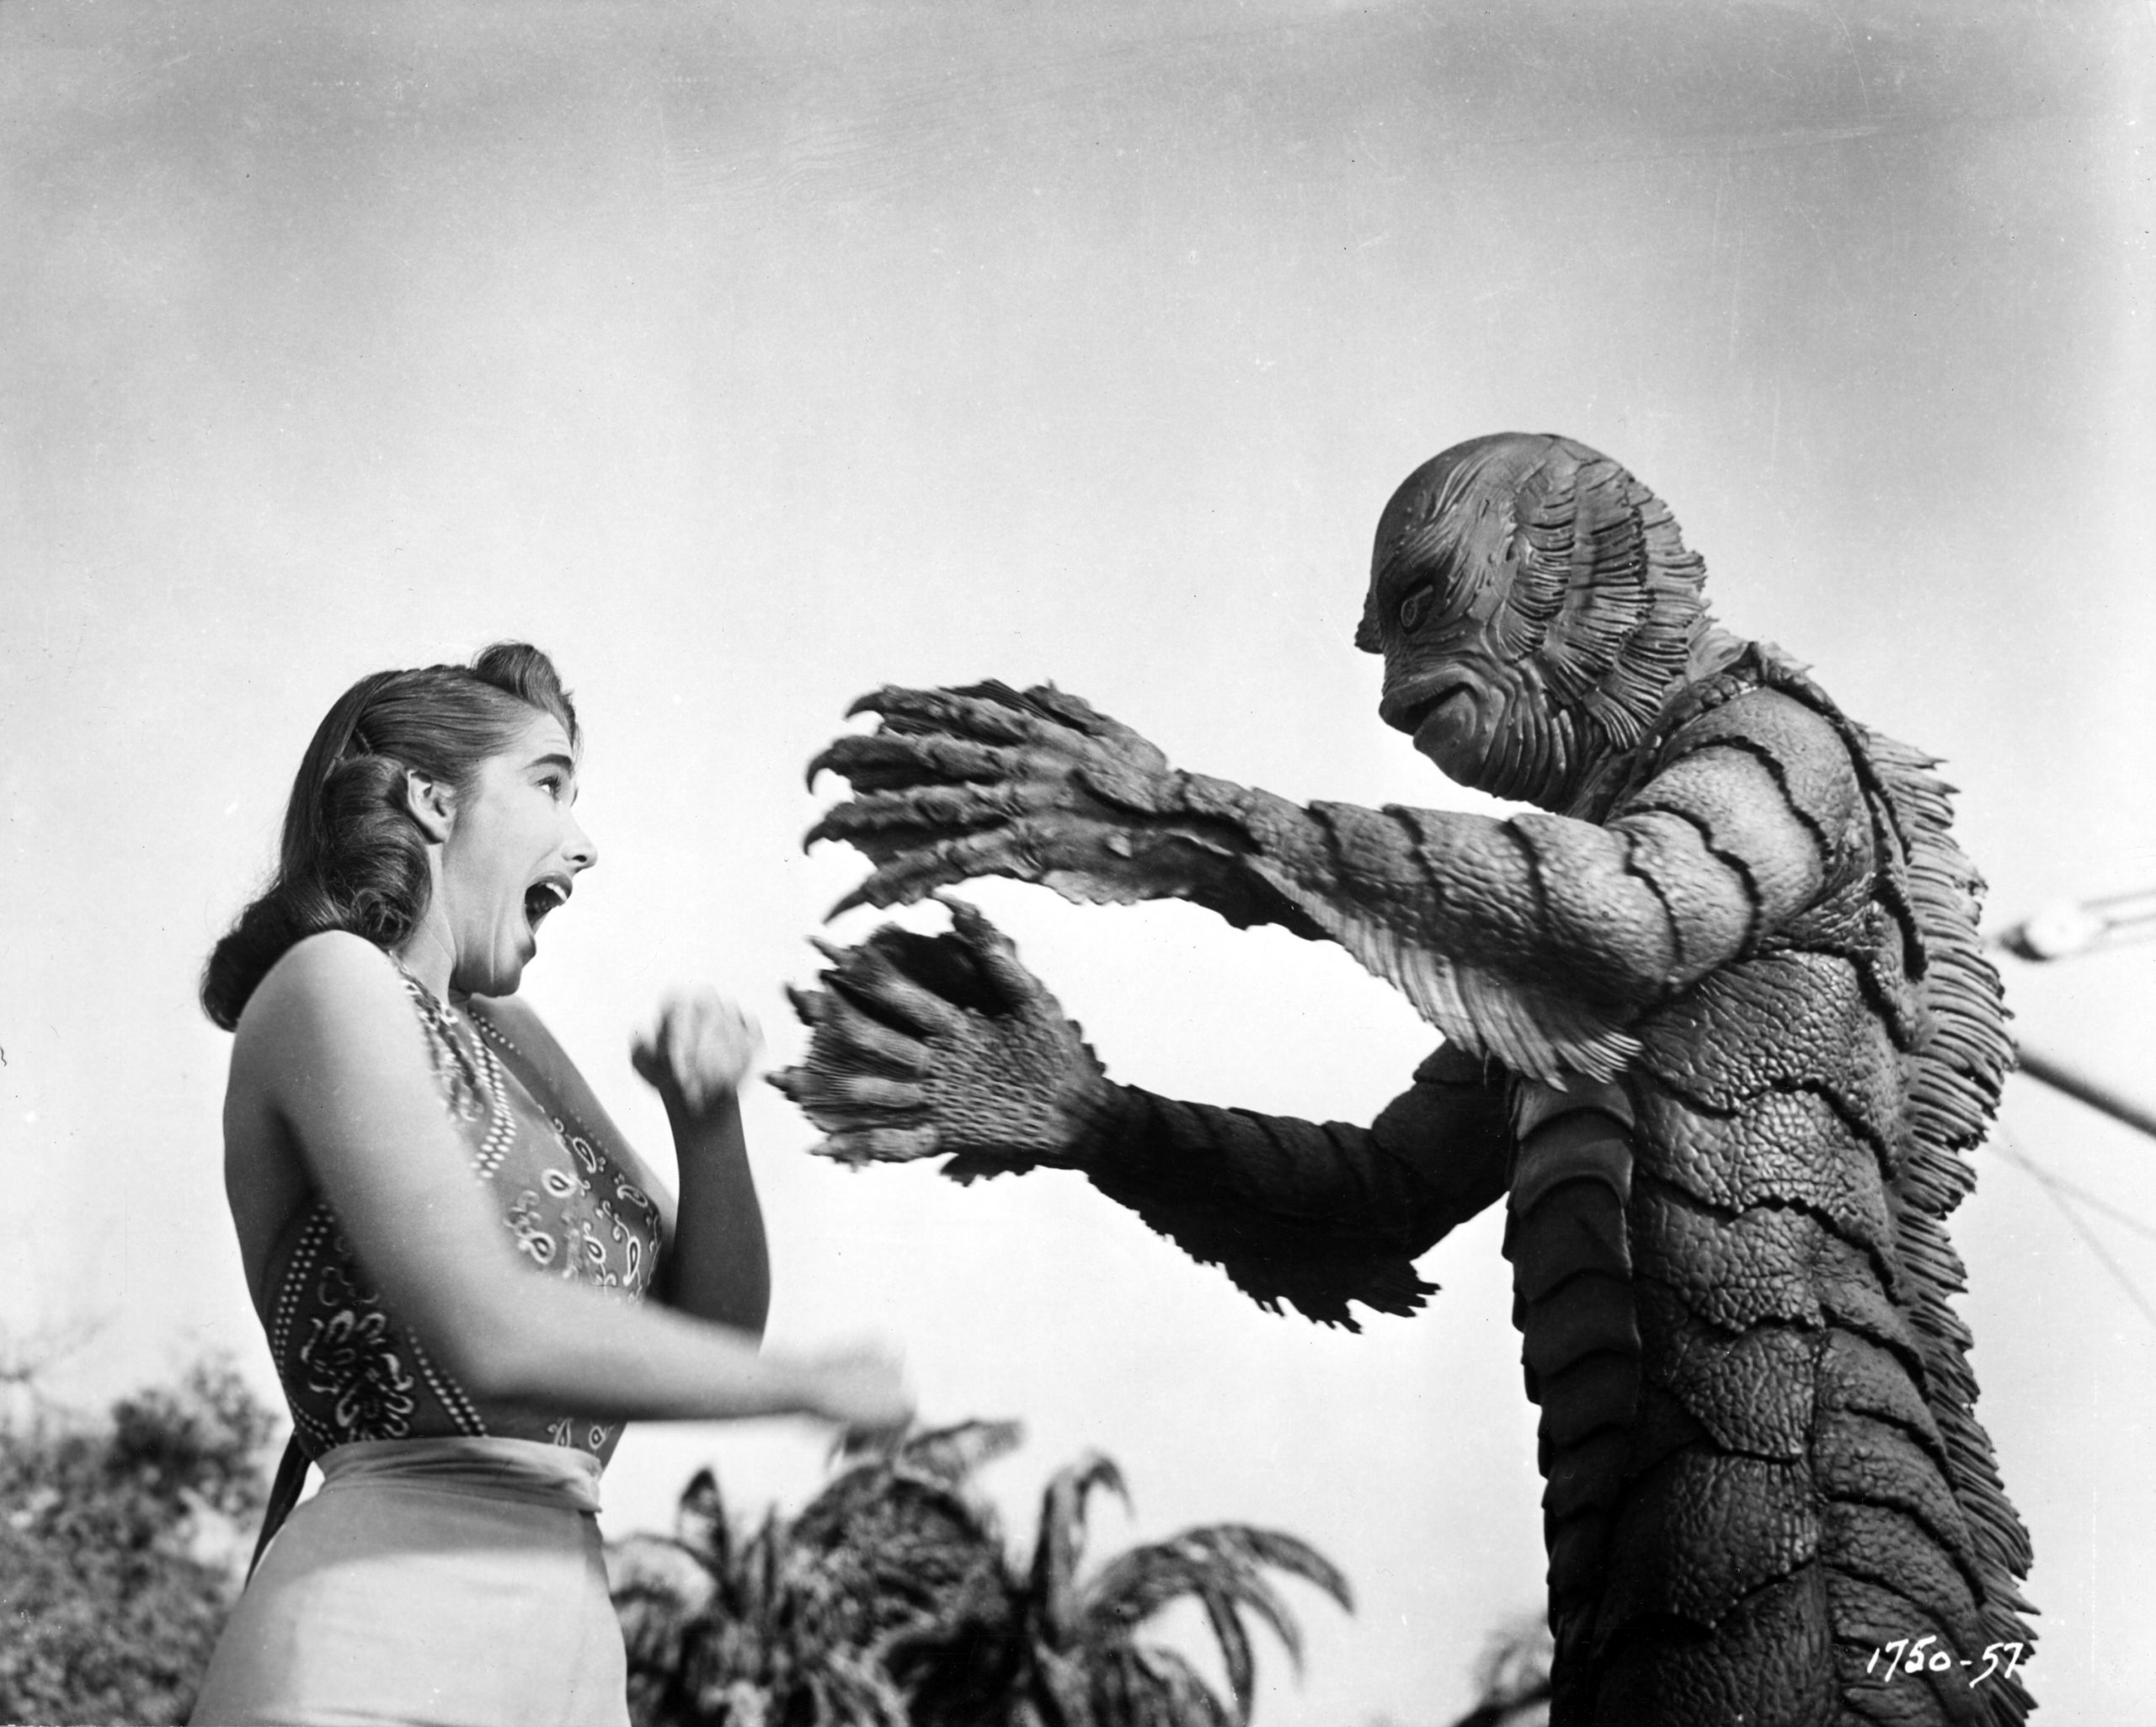 Creature from the Black Lagoon (Jack Arnold)